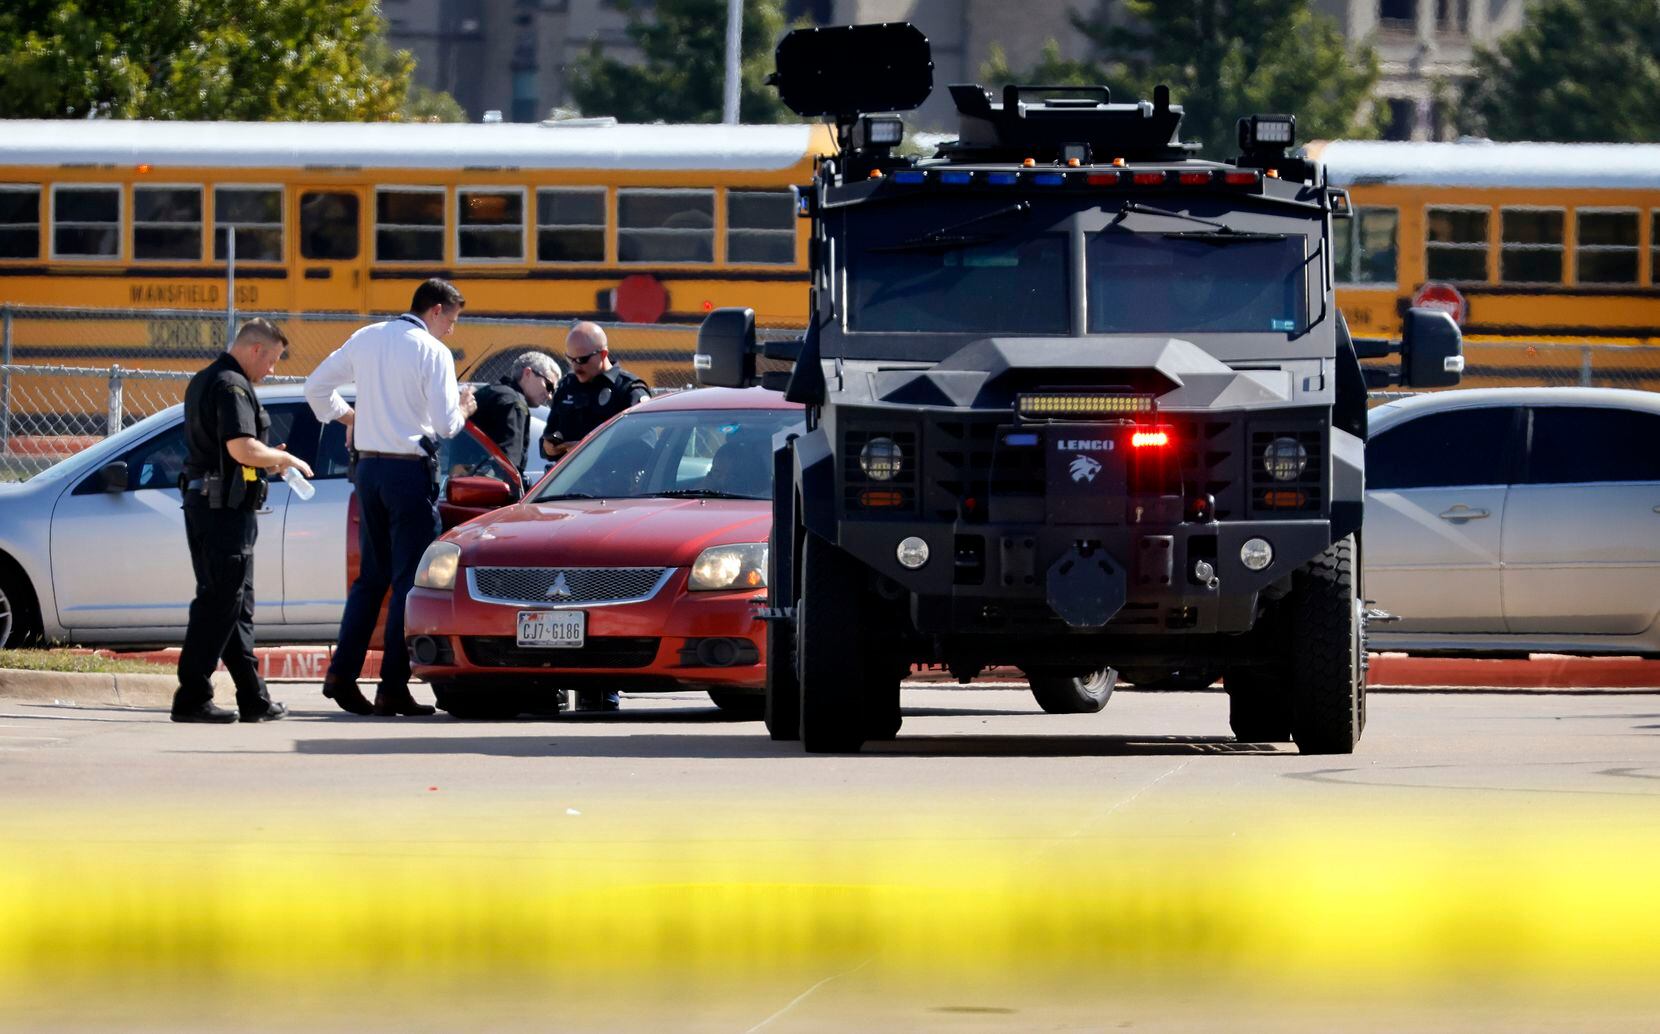 Police officials work the scene of a school shooting at Mansfield Timberview High School in Arlington, Texas, Wednesday, October 6, 2021. Four people were injured in a shooting at Timberview High School in Arlington on Wednesday morning, and authorities said the suspect remained at large. (Tom Fox/The Dallas Morning News)